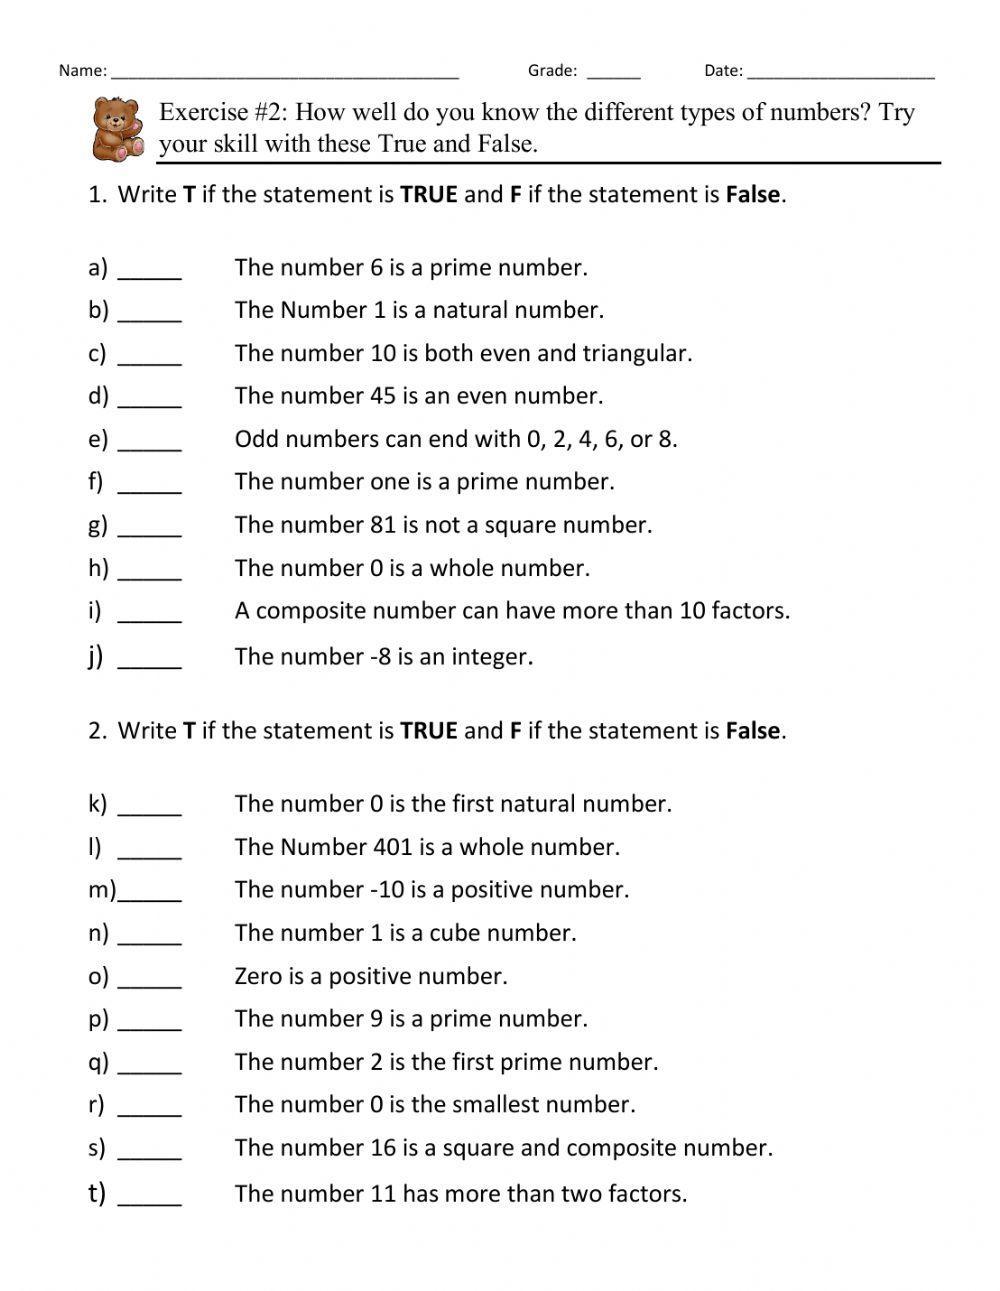 types-of-numbers-activity-live-worksheets